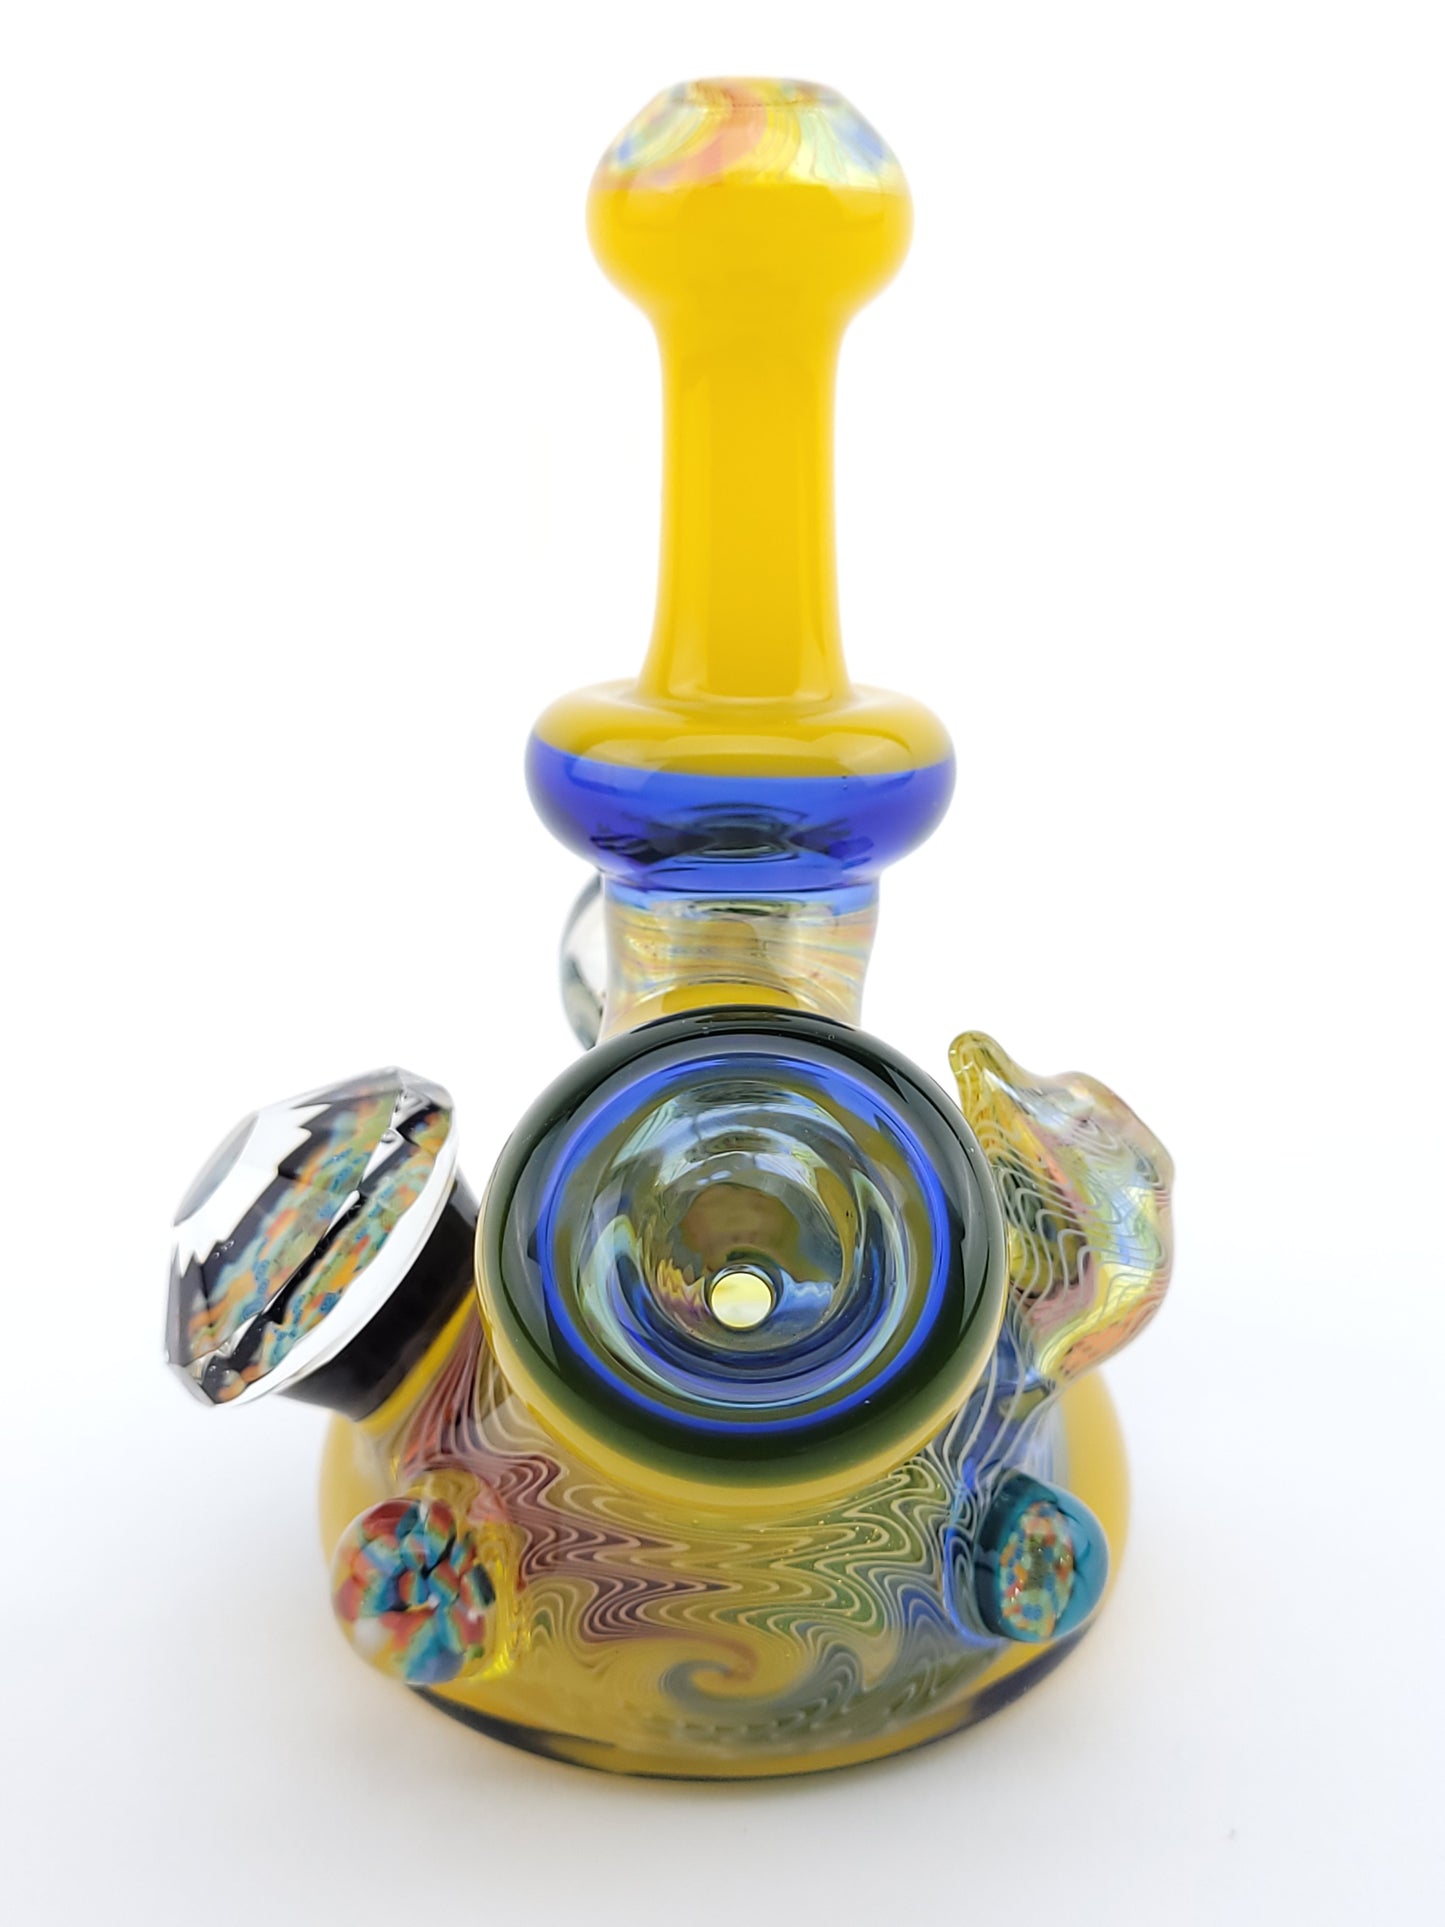 COWBOY Squater Yellow W/ Millies and Faceted Attachments